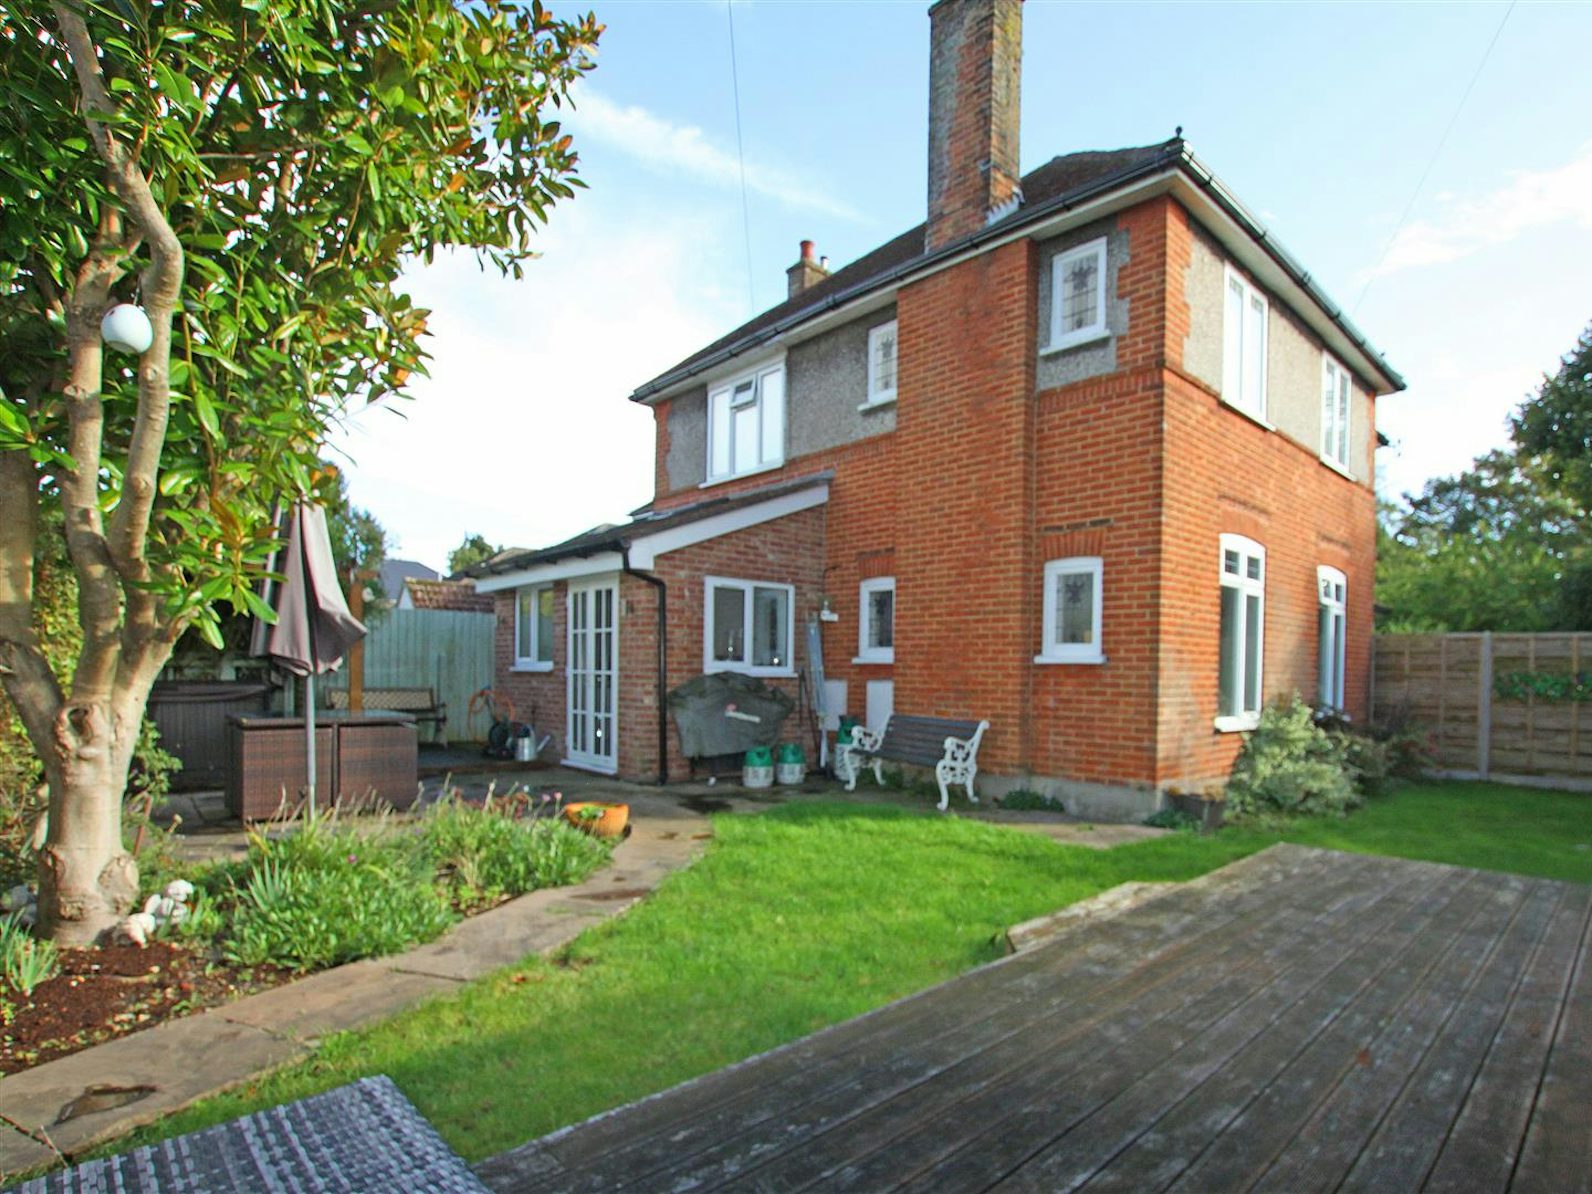 Detached house for sale on Ashling Crescent Bournemouth, BH8